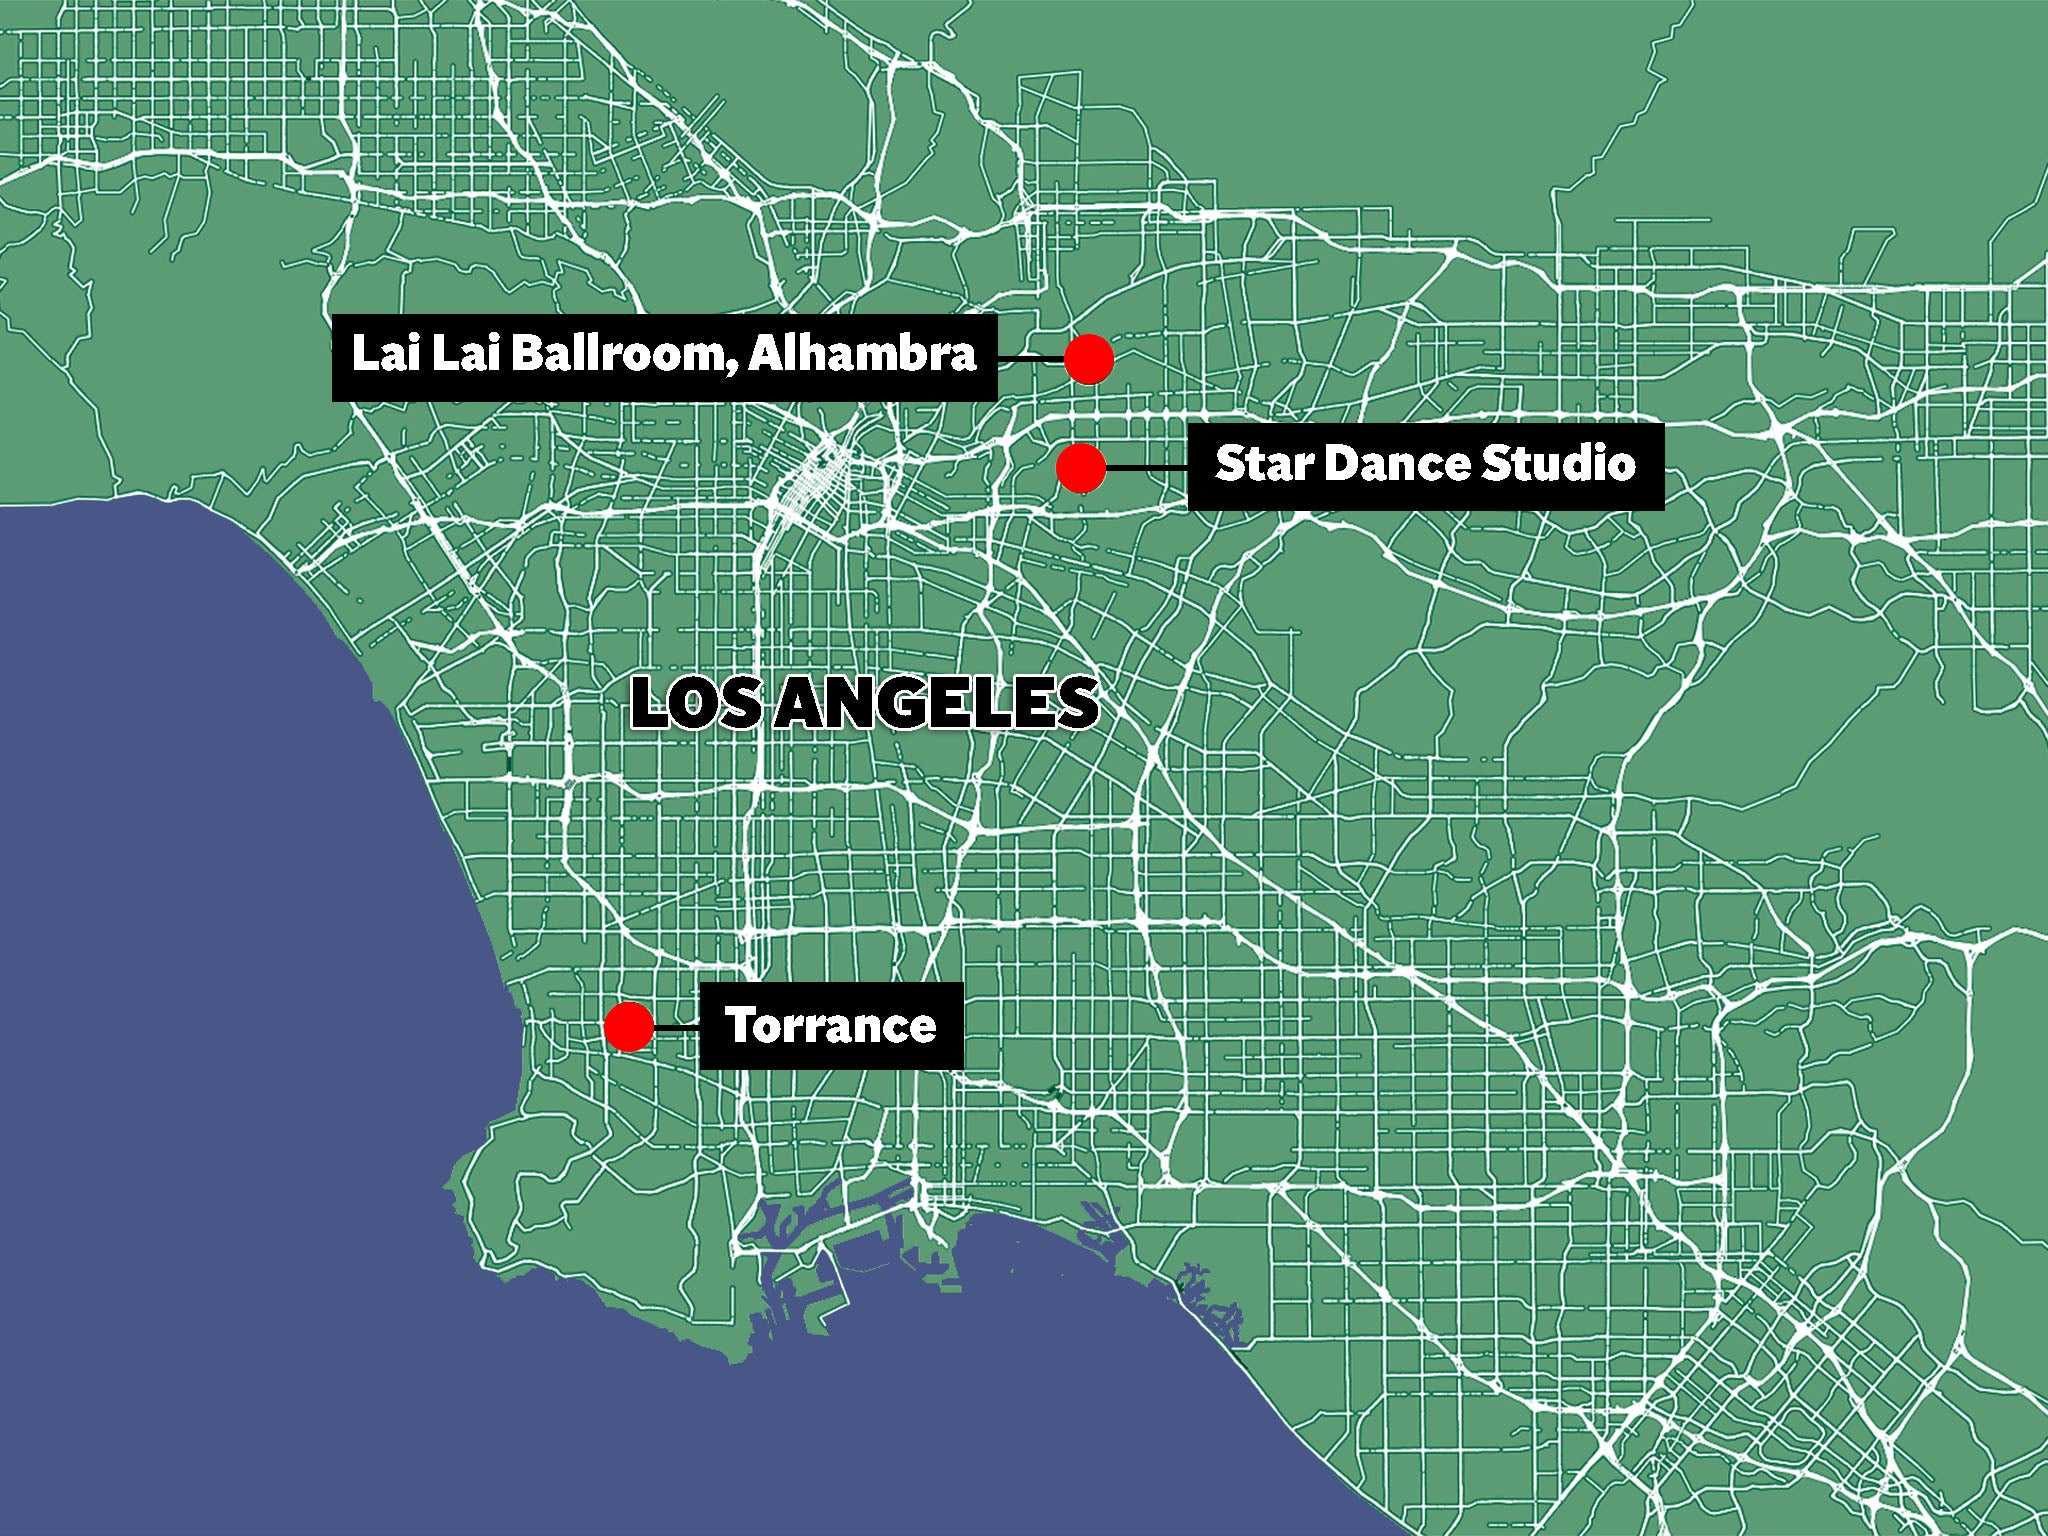 Map showing locations of Star Dance Studio, where gunman Huu Can Tran shot dead 10 people in Monterey Park on Saturday; the Lai Lai Ballroom, where he was disarmed by members of the public; and Torrance, where his van was stopped by police